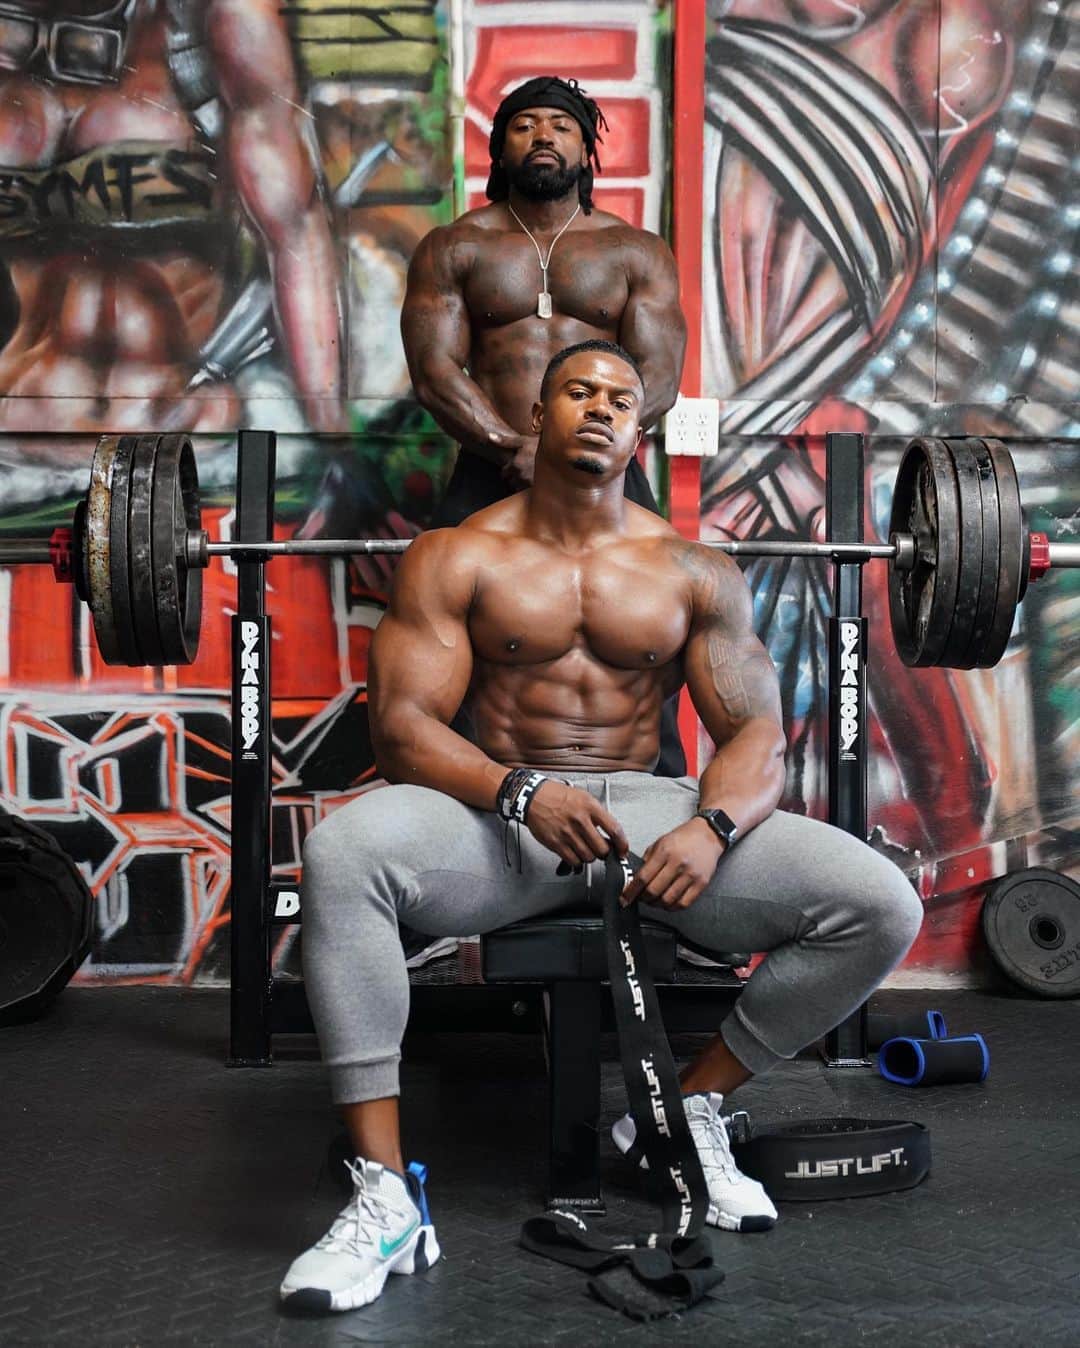 Simeon Pandaさんのインスタグラム写真 - (Simeon PandaInstagram)「Massive bench press session today with @mikerashid stay tuned for the @youtube vid coming soon 🔥💪🏾 ⁣ 👉 Subscribe at YouTube.com/Simeon panda⁣ ⁣ 🔥You can download my  training programs at SIMEONPANDA.COM⁣⁣⁣ ⁣⁣ 💴 Sign up to the @elimin8challenge for your chance to win a share of $6,000 💵 just to get in the best shape of your life 💪 Head to Elimin8.com  Link in bio⁣⁣⁣⁣⁣ ⁣⁣⁣⁣⁣⁣⁣⁣ 💊 Follow @innosupps INNOSUPPS.COM ⚡️ for the supplements I use👌🏾⁣⁣⁣⁣⁣⁣⁣⁣⁣ ⁣⁣⁣⁣⁣⁣ 👉 Be sure to SUBSCRIBE to my YouTube channel: YouTube.com/simeonpanda 👈⁣⁣⁣⁣⁣⁣ Many more 🏠 home workouts all FREE at Youtube.com/simeonpanda ⁣⁣⁣⁣」10月20日 5時19分 - simeonpanda